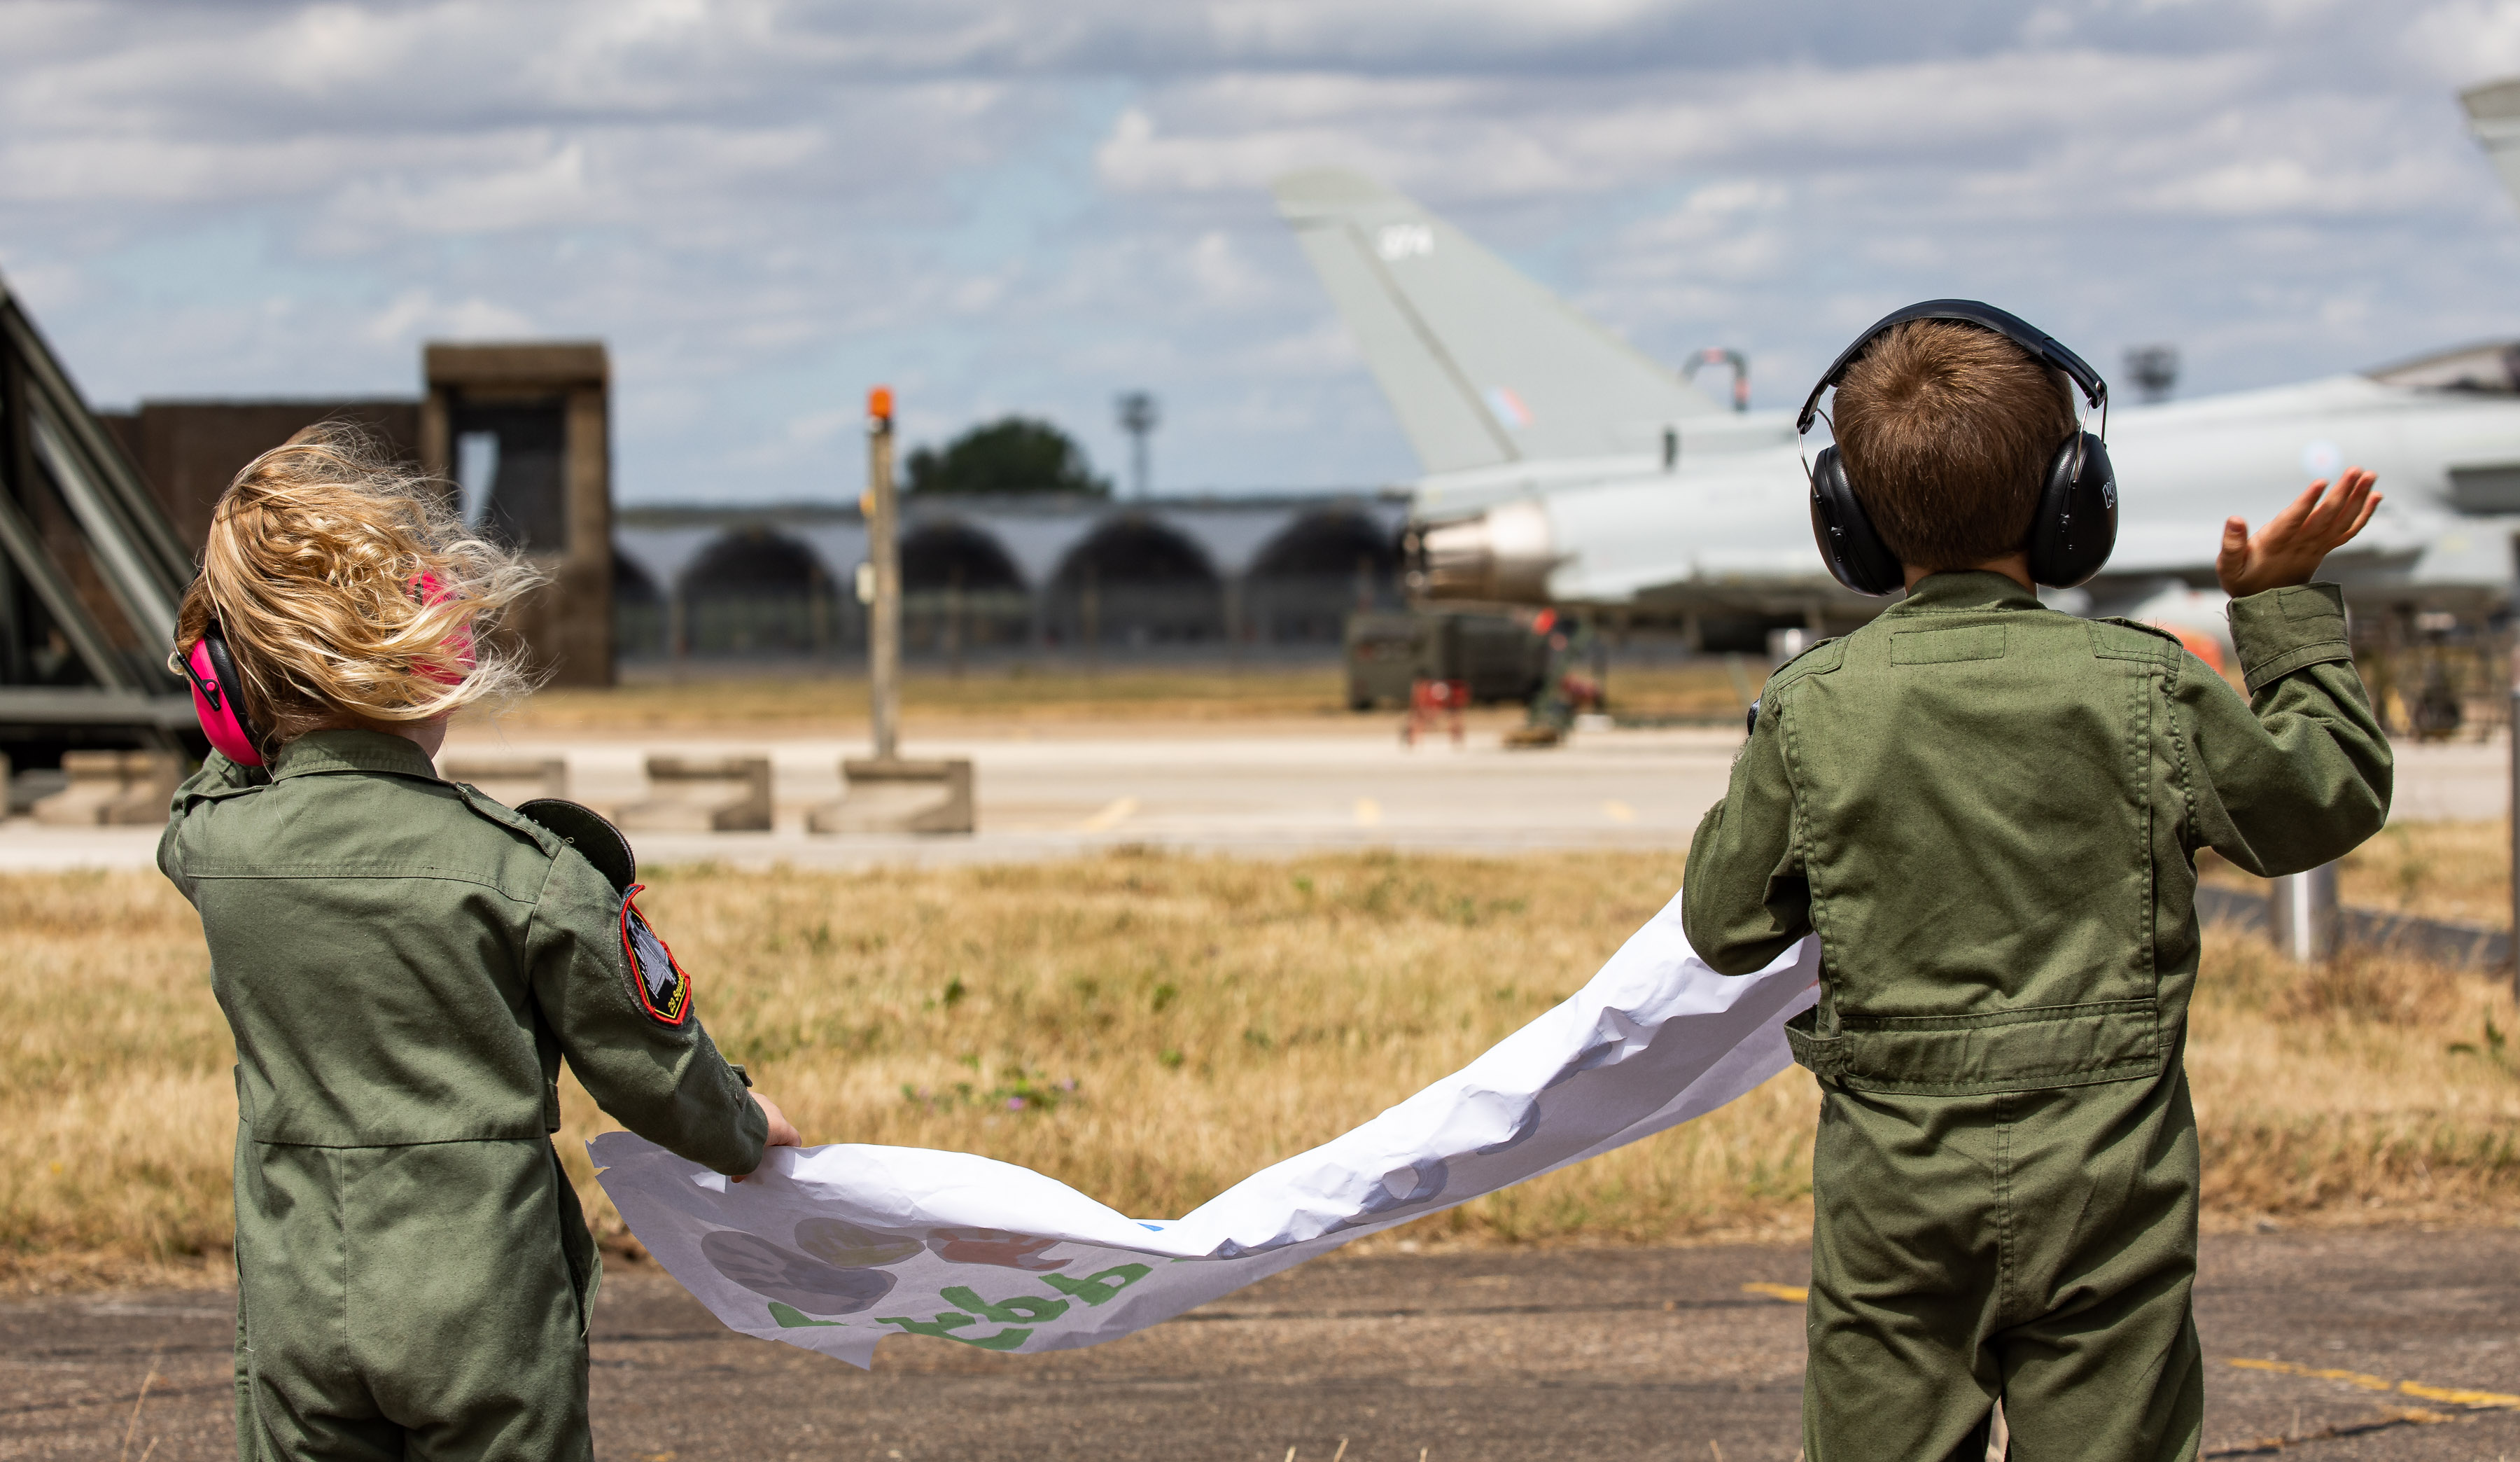 Image shows two children waving on the airfield and holding poster.